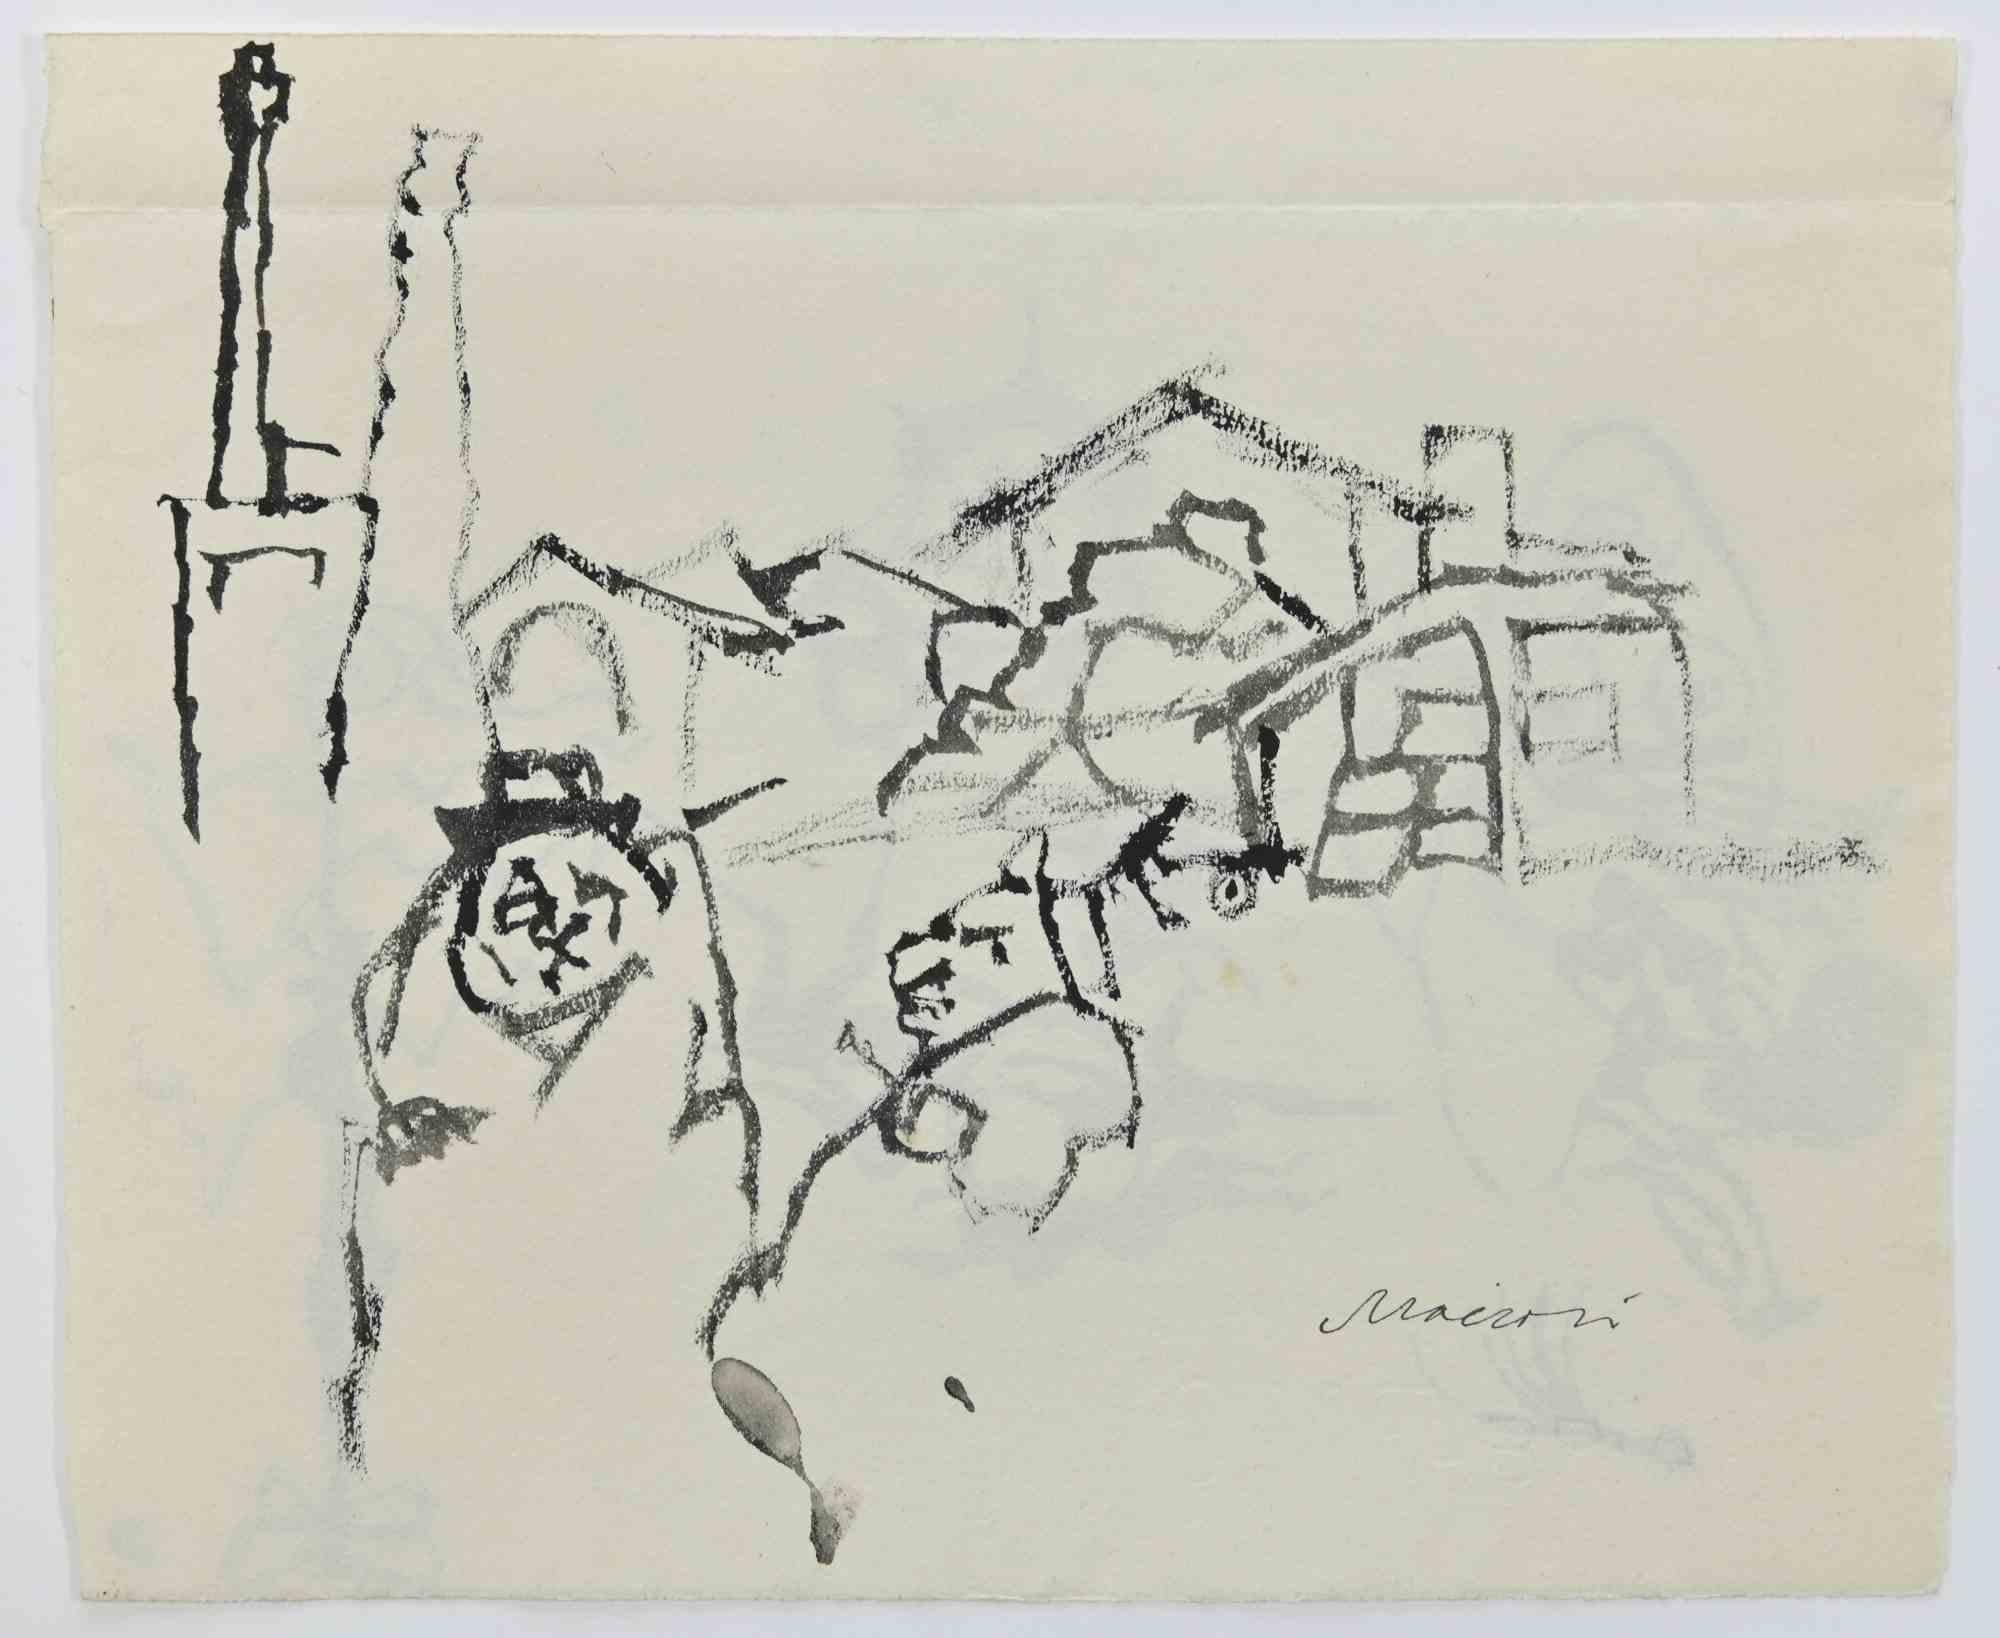 Landscape is a China ink Drawing realized by Mino Maccari  (1924-1989) in the 1960s.

Hand-signed on the lower, with another drawing on the rear.

Good condition with slight folding.

Mino Maccari (Siena, 1924-Rome, June 16, 1989) was an Italian